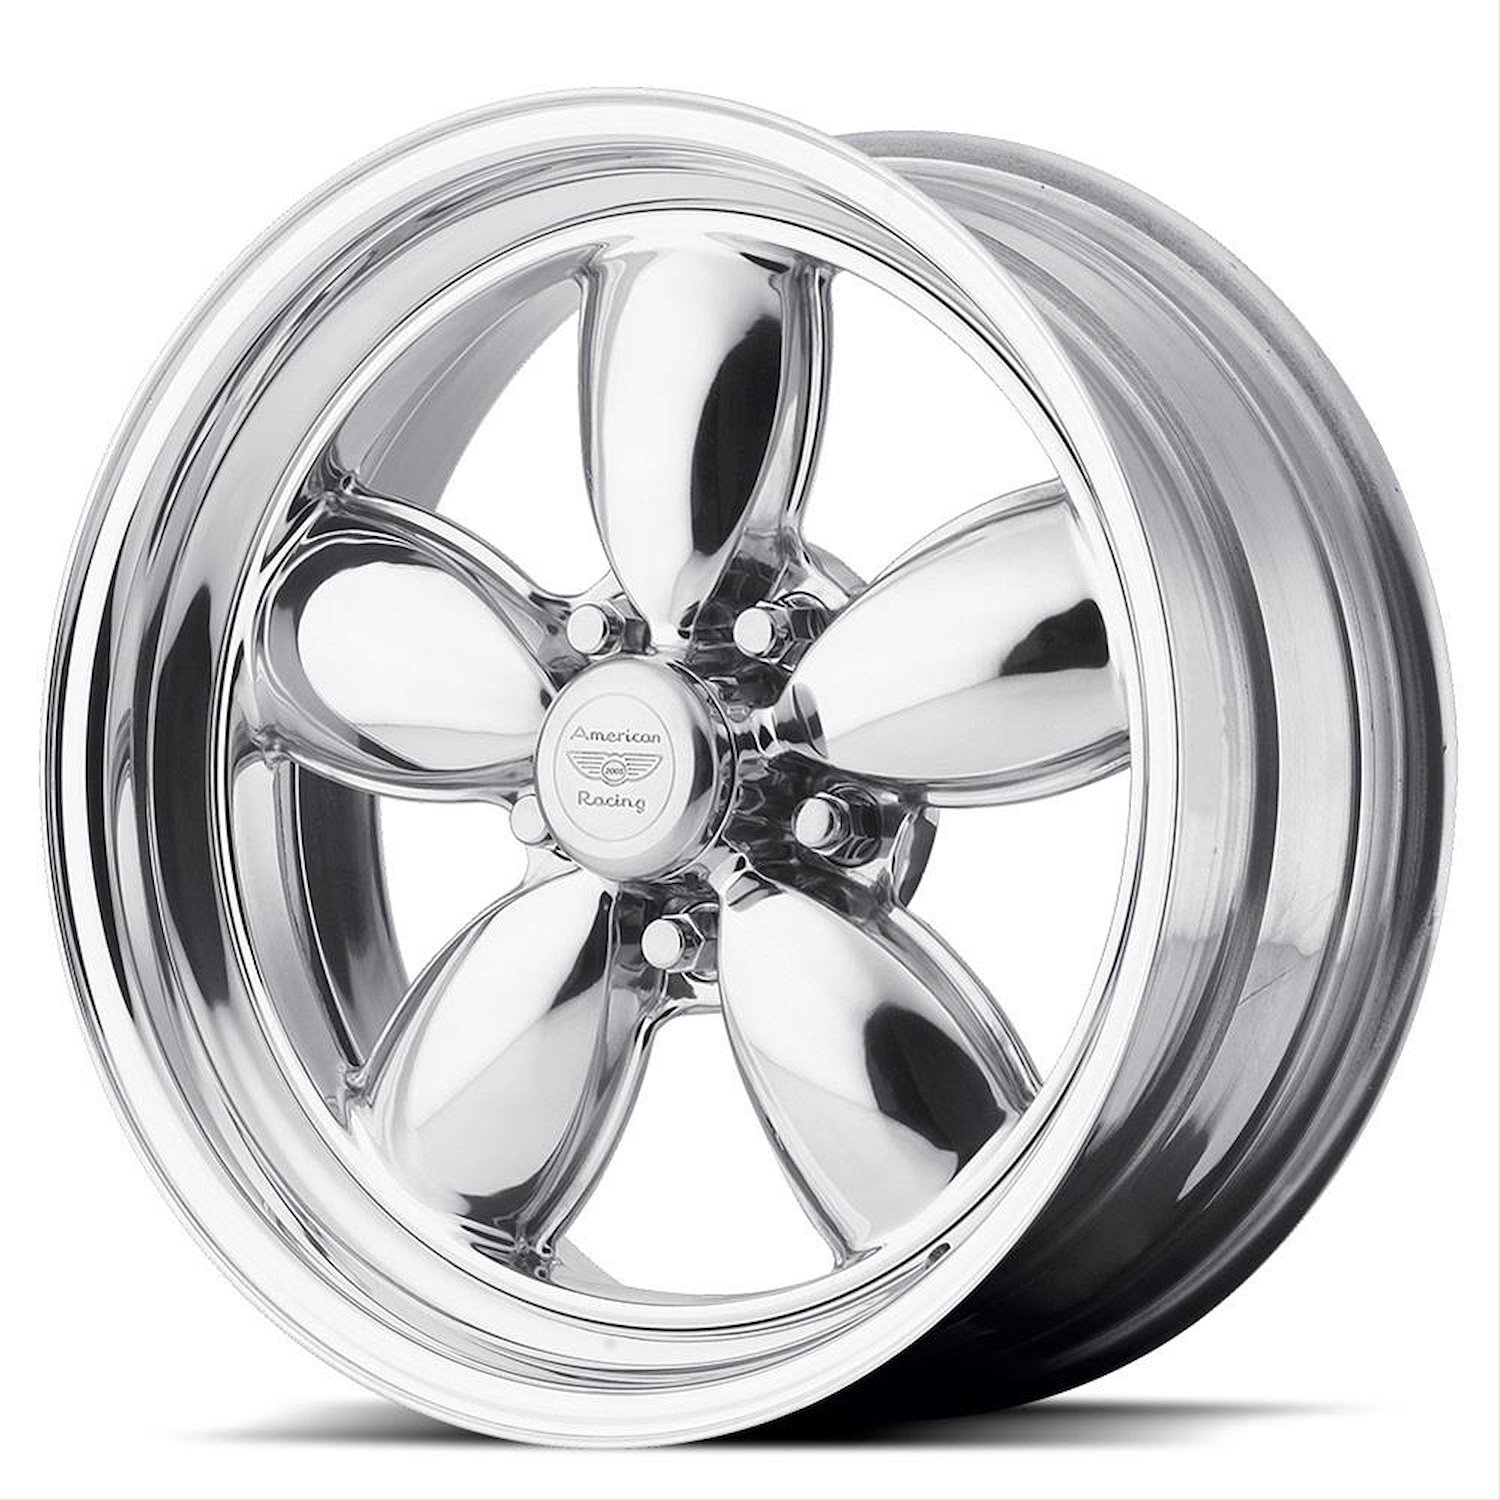 AMERICAN RACING CLASSIC 200S TWO-PIECE POLISHED 17 x 9.5 5X4.75 0 5.25